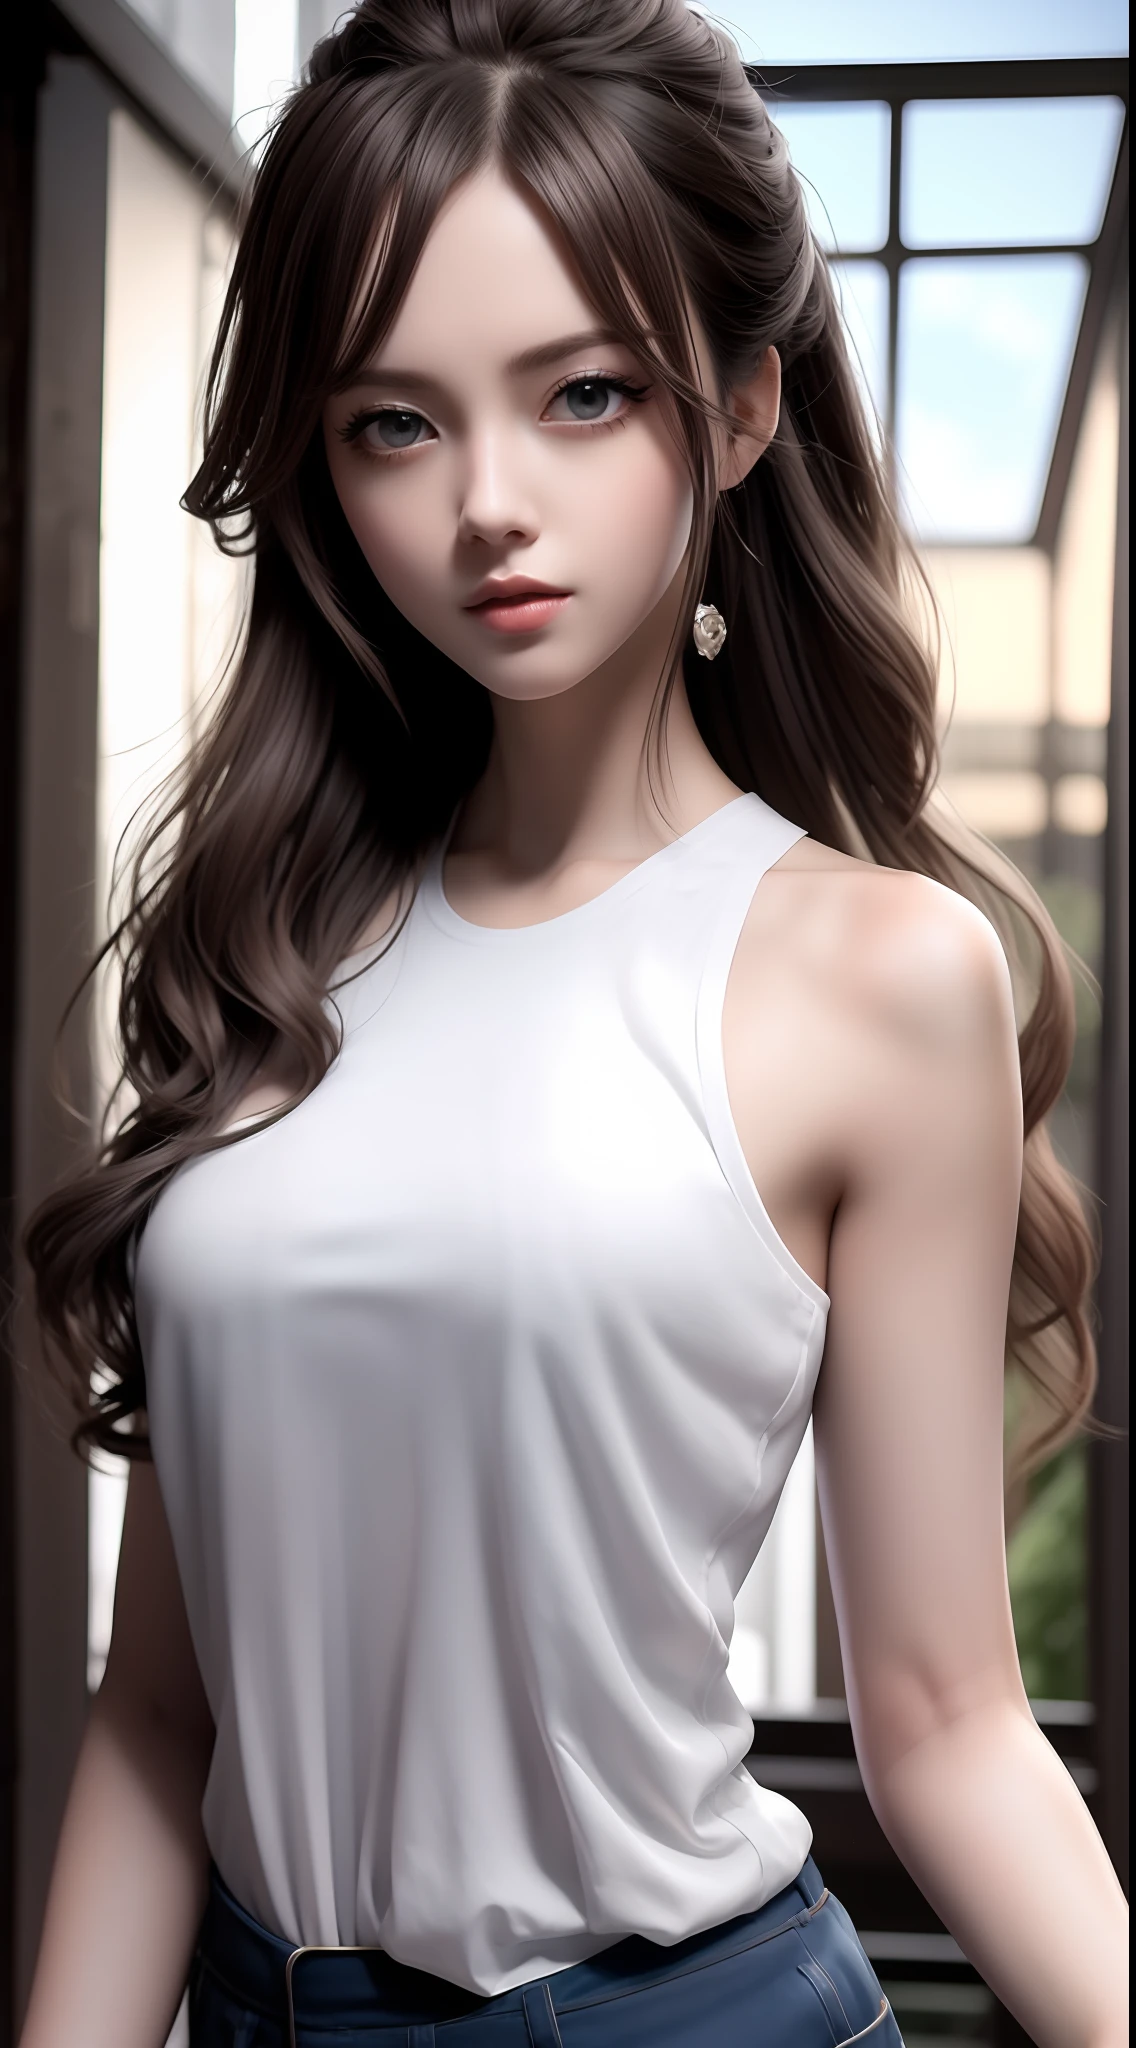 4k ultra hd, masterpiece, very high quality, a girl, age 20 years old girl, good face, smooth face, detailed eyes, beautiful hair, very long hair, hair band, cute look, modern dress, pink shirt, black jeans, morning background, buildings, sun lights, clear weather, stylish looking,